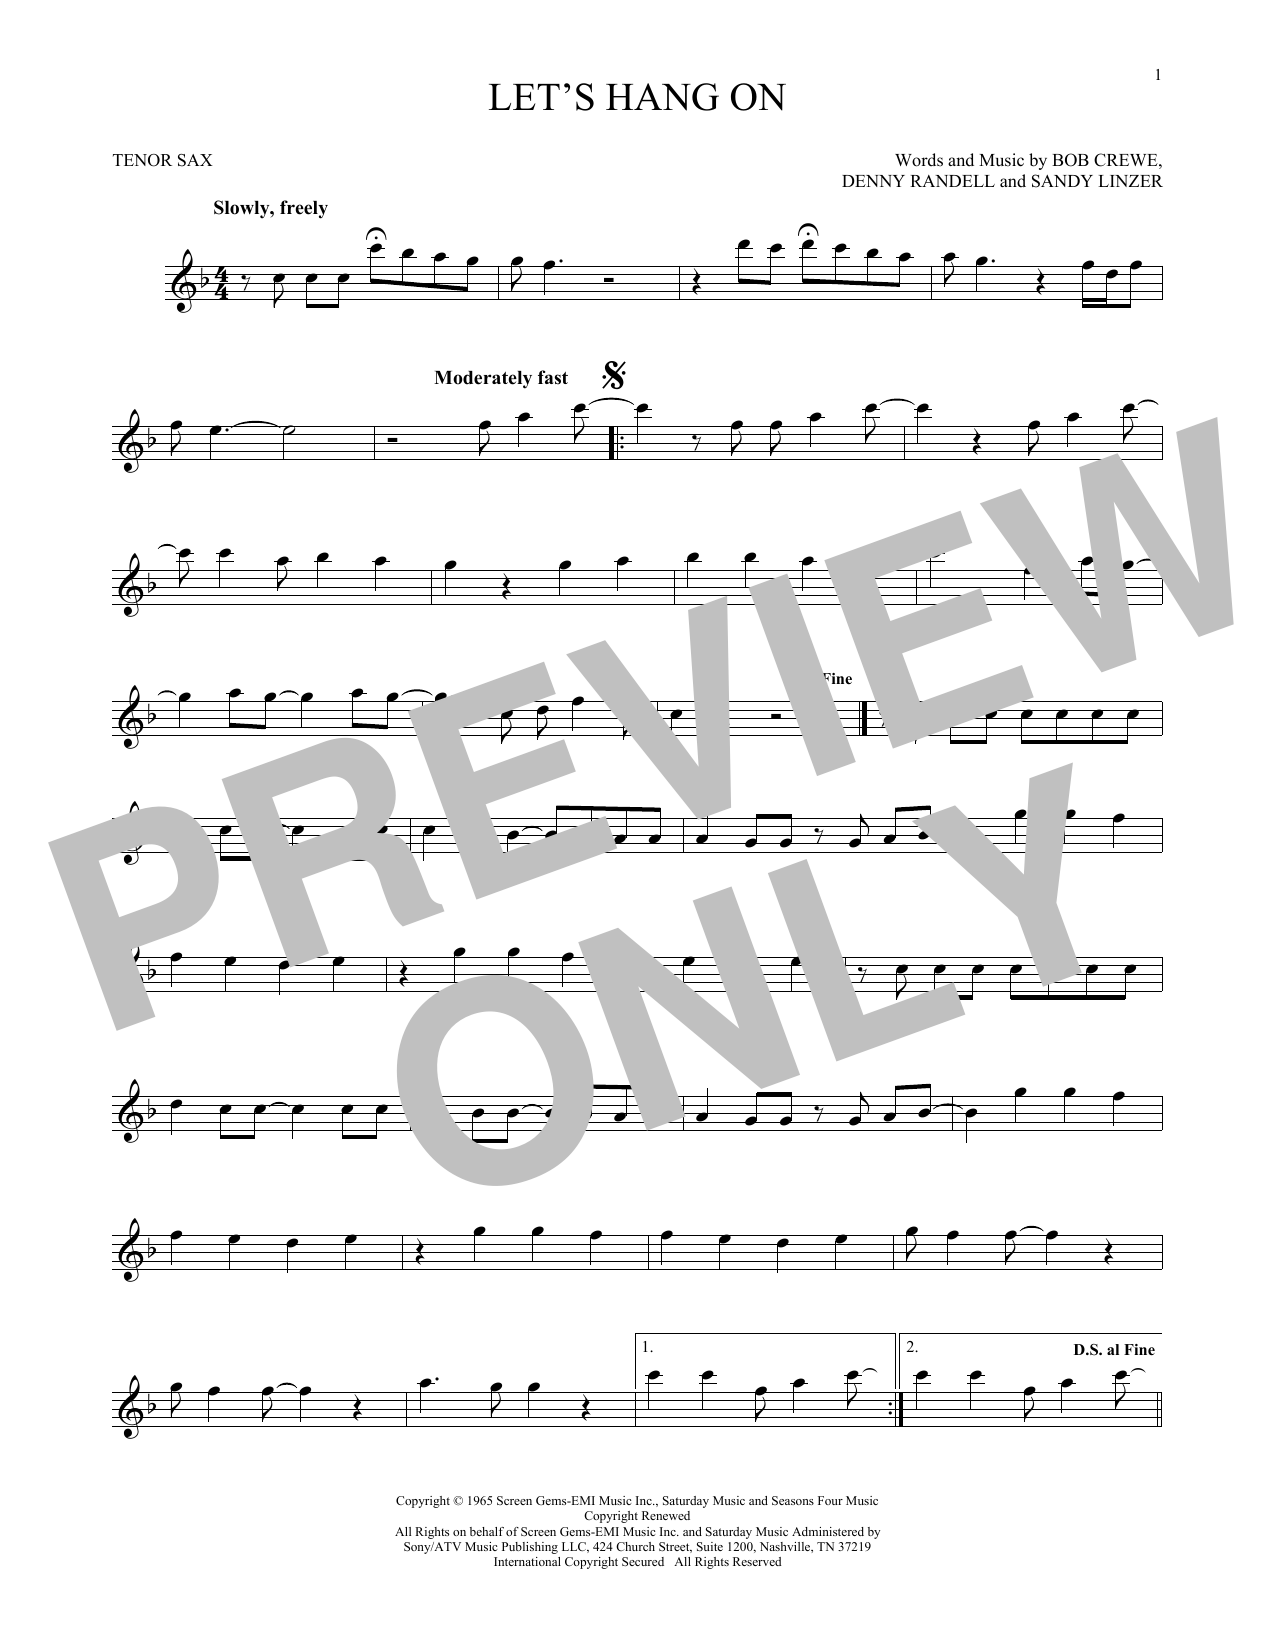 Download The 4 Seasons Let's Hang On Sheet Music